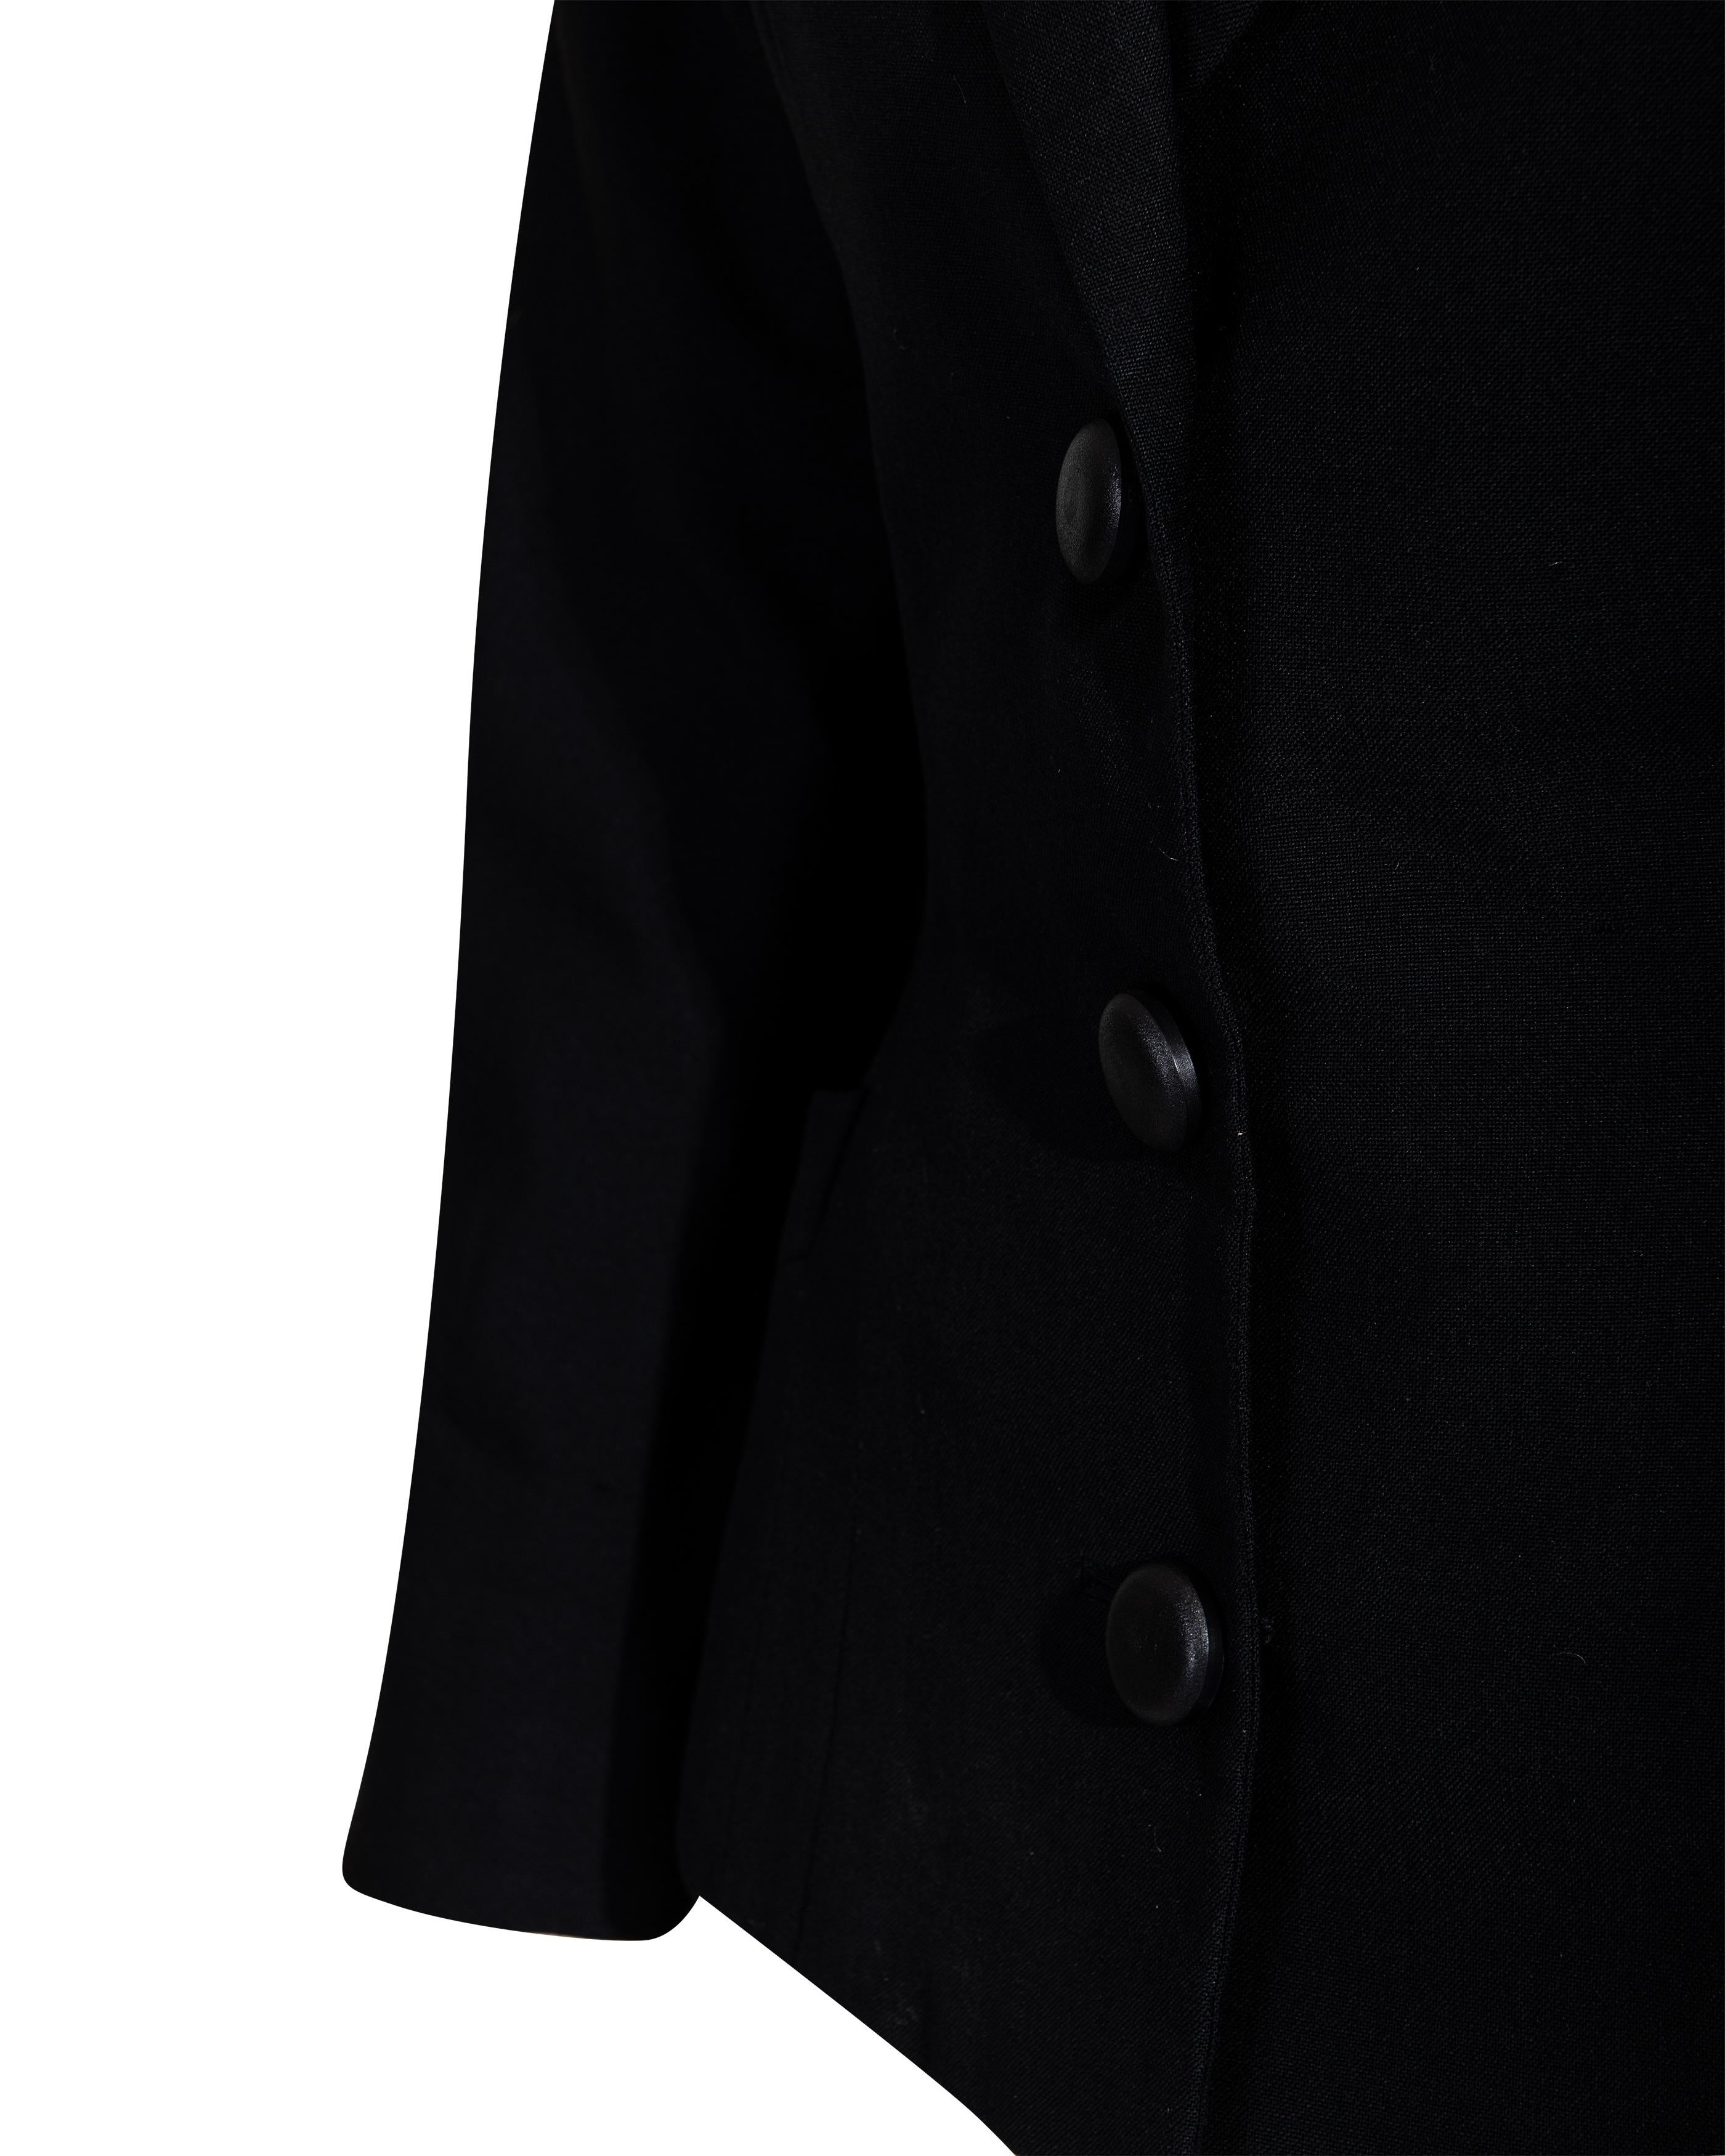 c. 1950 Christian Dior 'New Look' Black Wool Jacket For Sale 3